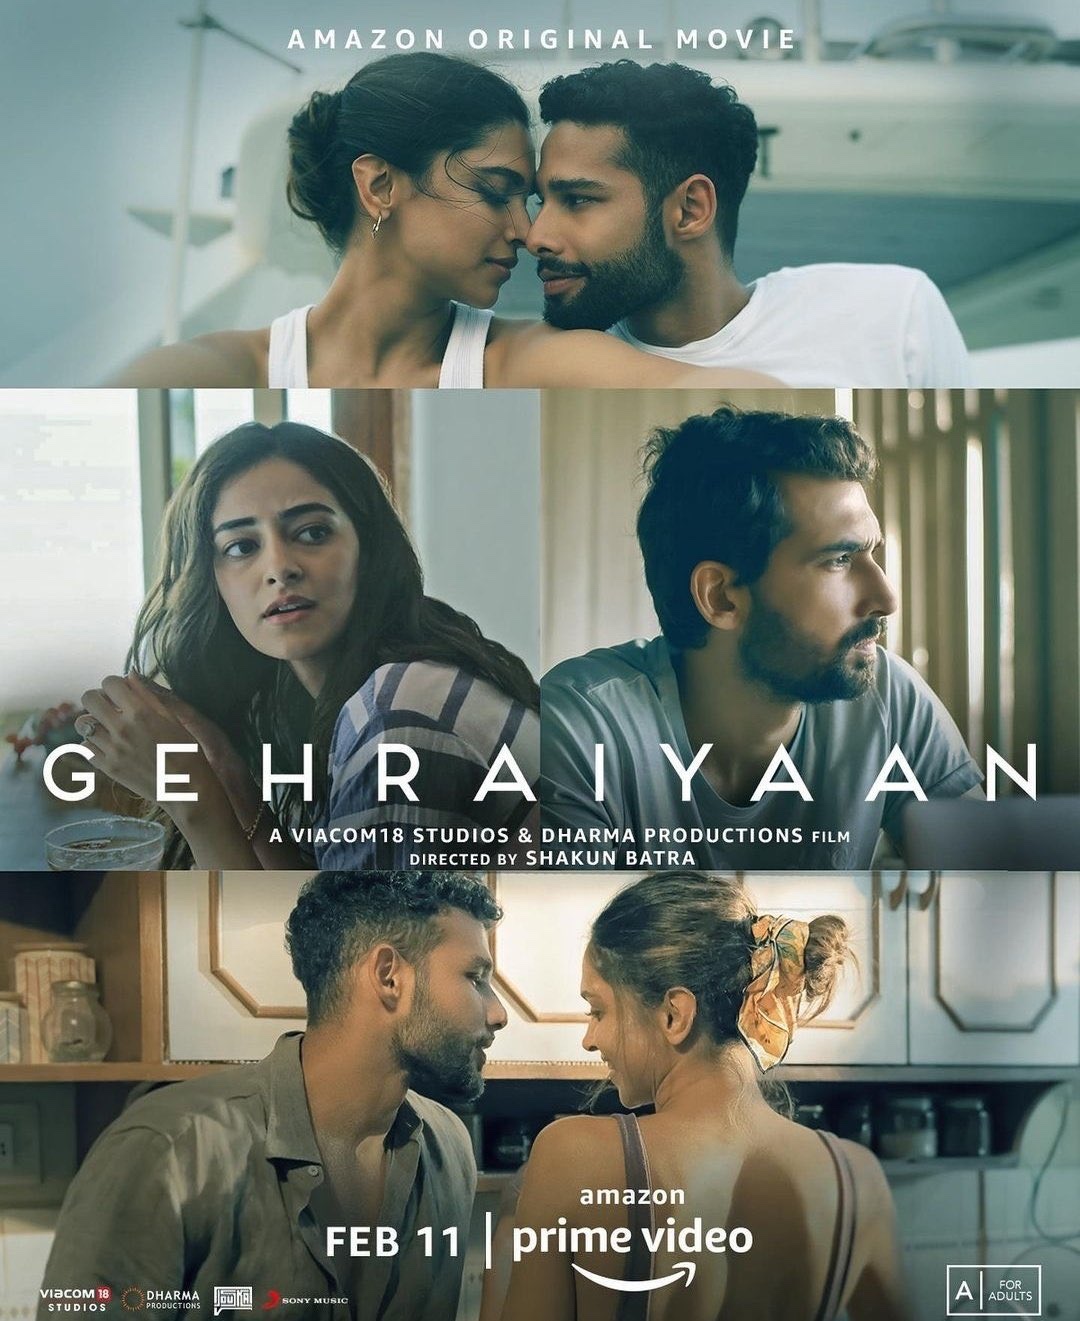 Steamy Trailer for ‘Gehraiyaan’ Dropped